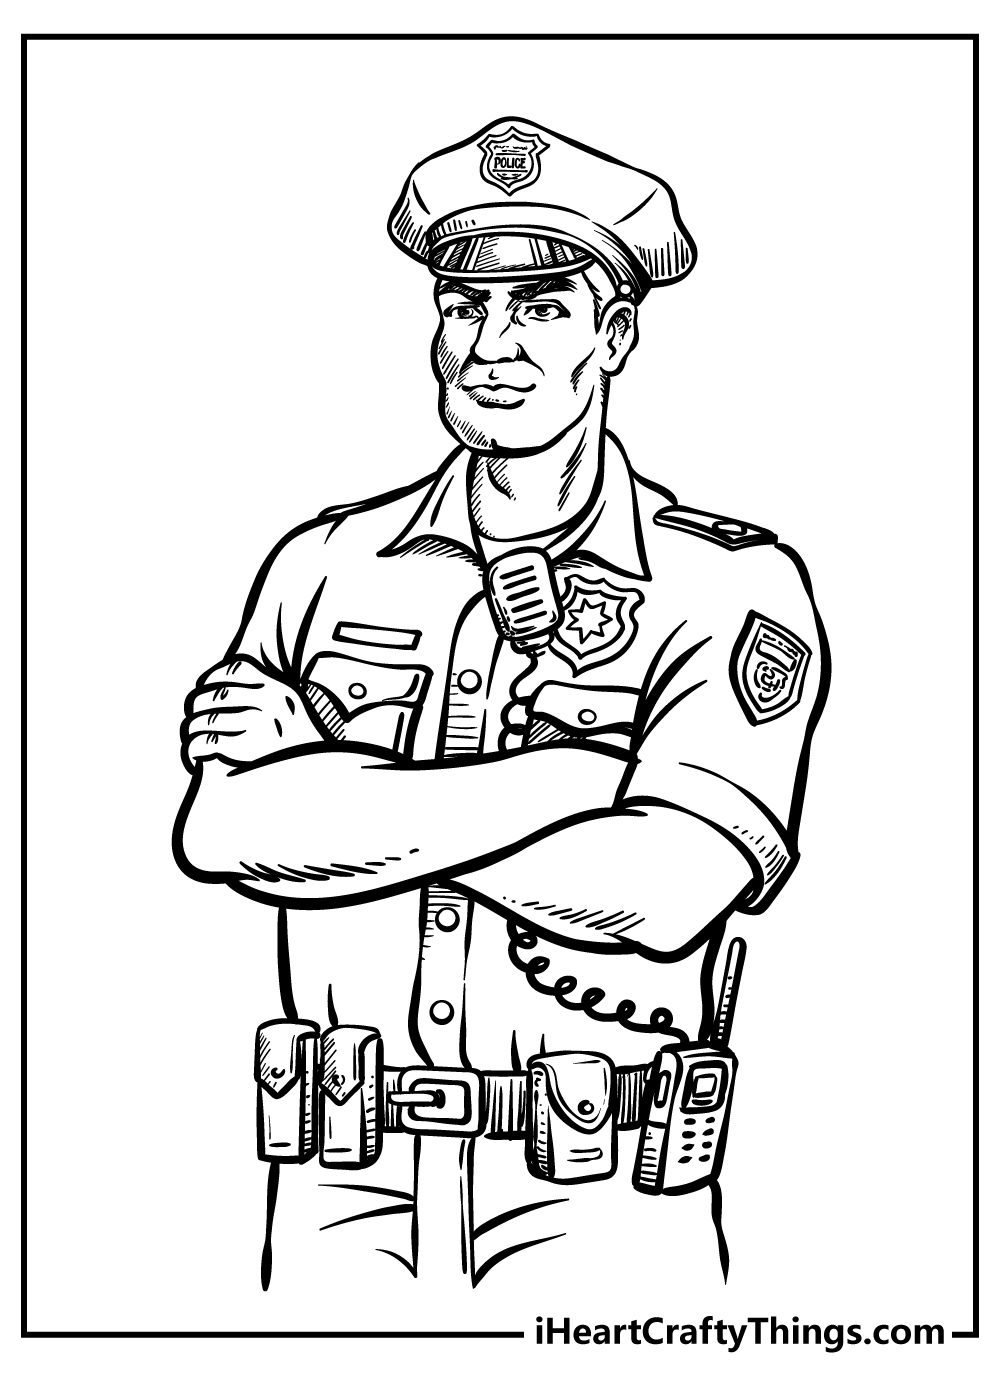 Police Coloring Pages for kids free download